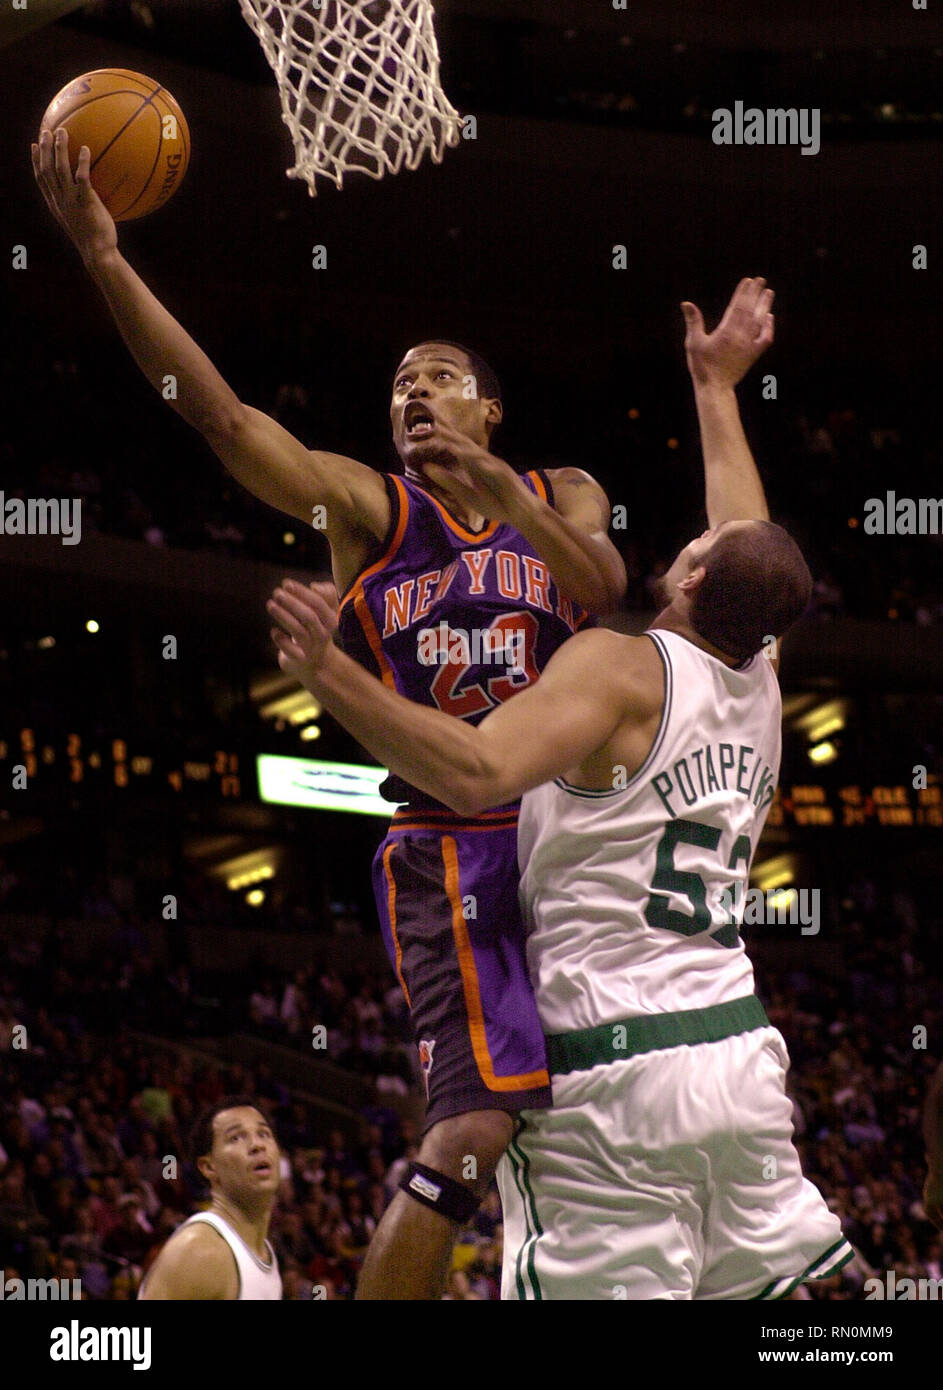 NEW YORK KNICKS MARCUS CAMBY SCORES THE WINNING GO AHEAD TWO POINTER IN OVERTIME ACTION AGAINST BOSTON  CELTIC VITALY POTAPENKO  AT THE FLEET CENTER IN BOSTON MA USA,11-10-2000  PHOTO BY BILL BELKNAP Stock Photo